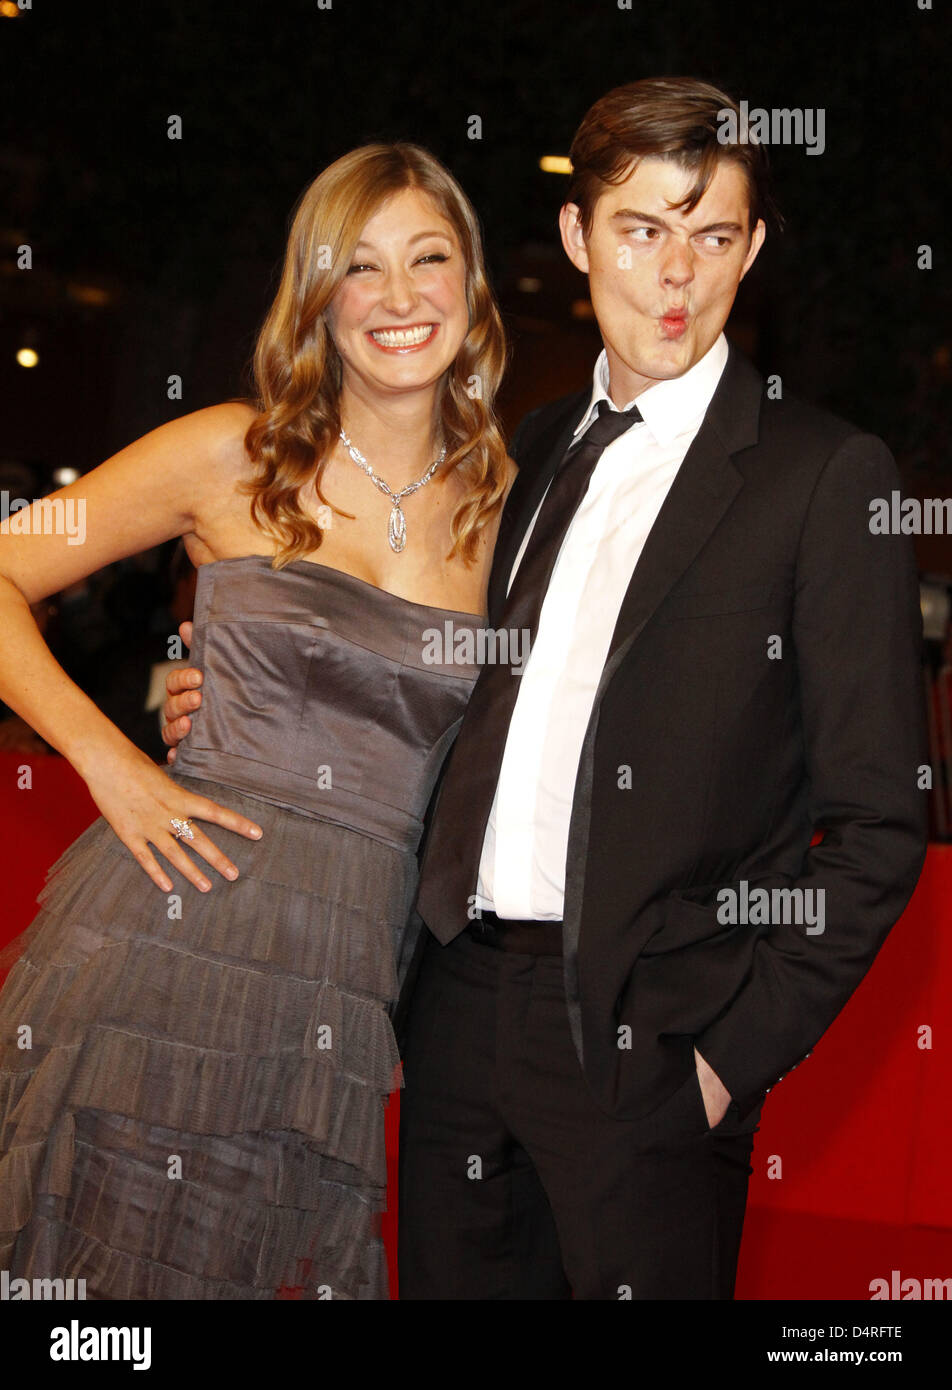 German actress Alexandra Maria Lara (L) and her husband Sam Riley (R) arrive for the premiere of the film ?The City Of Your Final Destination? at the 4th International Rome Film Festival in Rome, Italy, 16 October 2009. Photo: Hubert Boesl Stock Photo